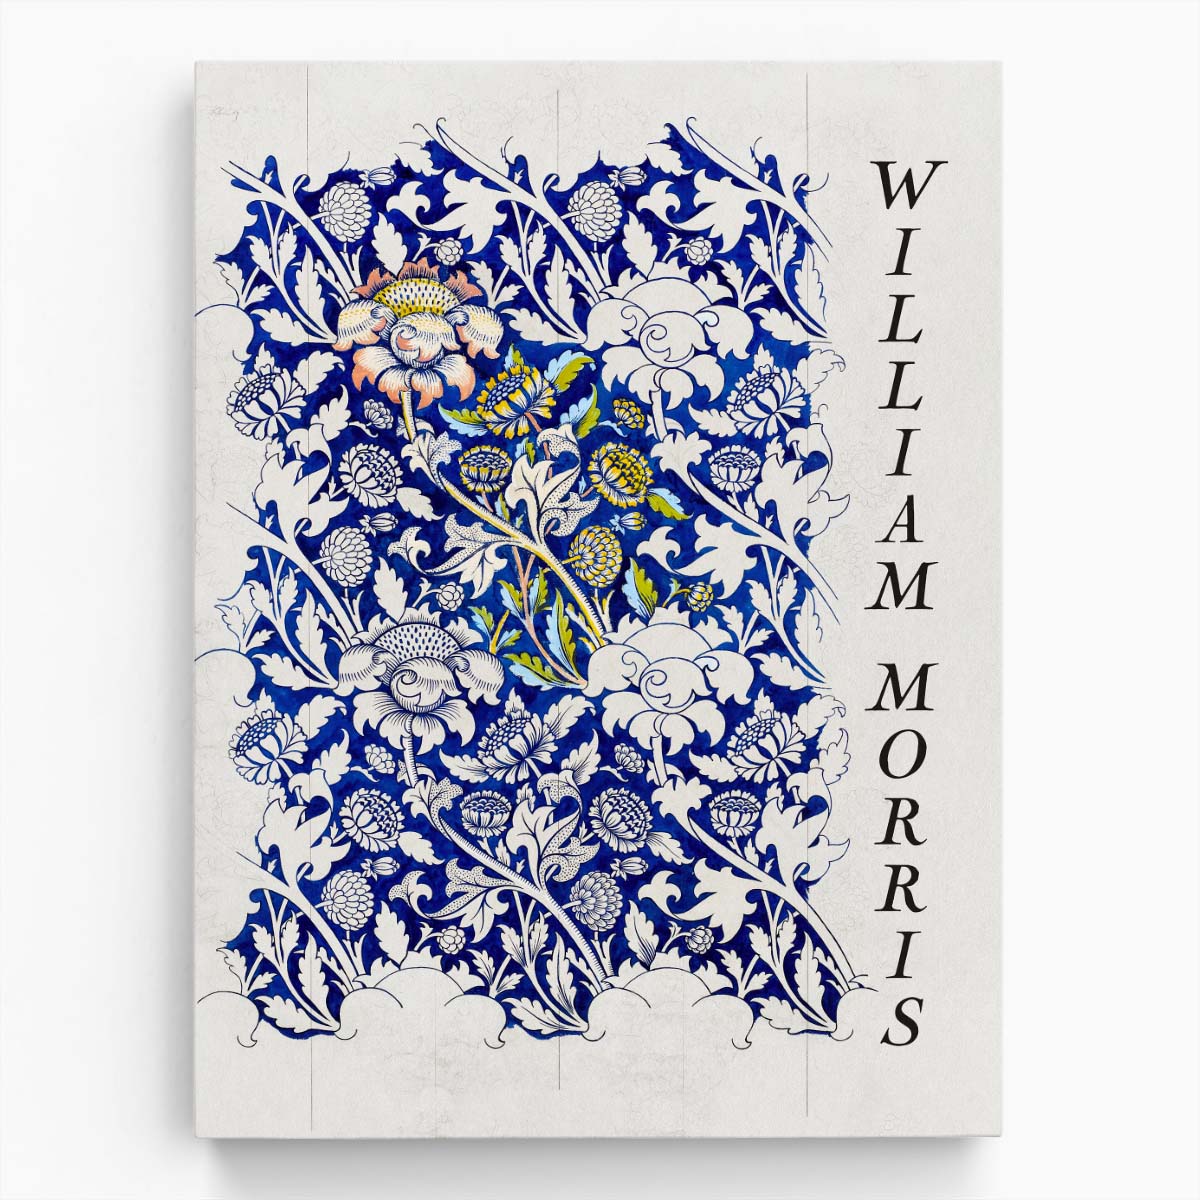 William Morris' Wey Vintage Botanical Illustration Wall Art by Luxuriance Designs, made in USA